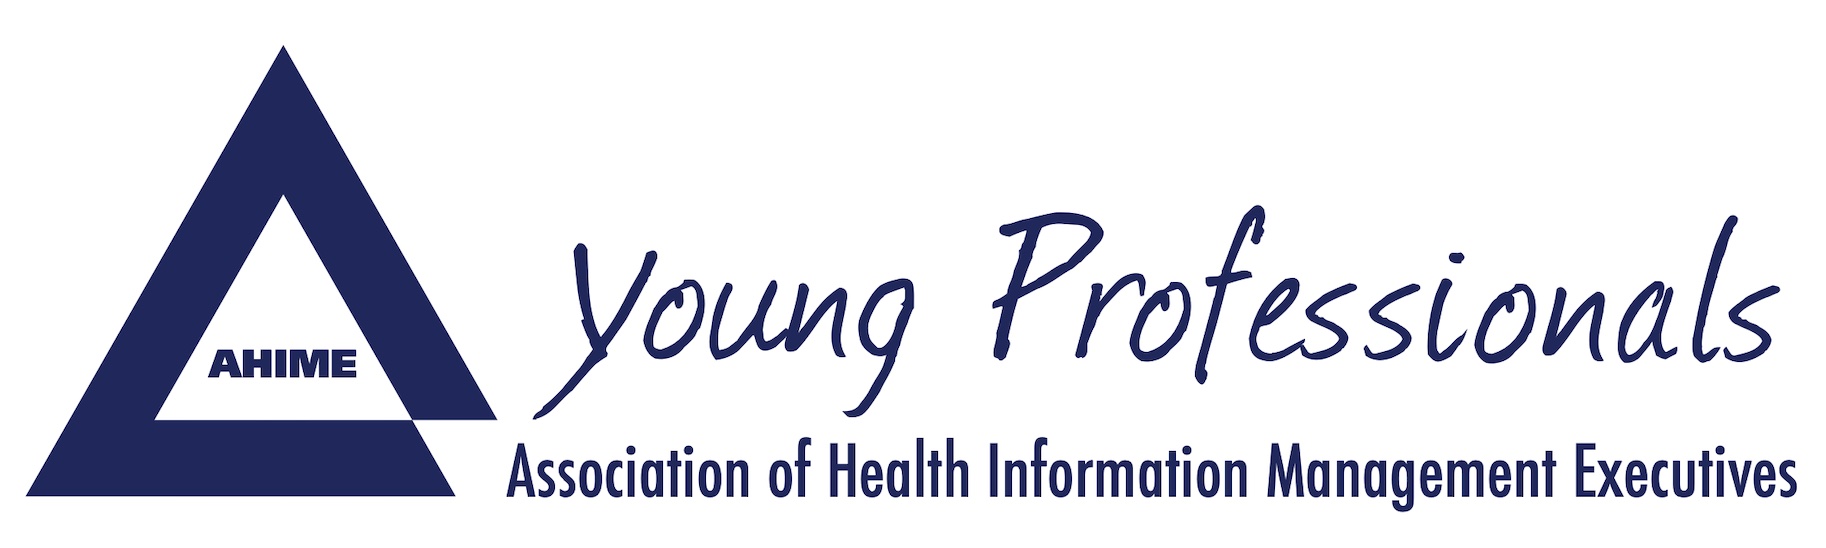 AHIME Young Professionals